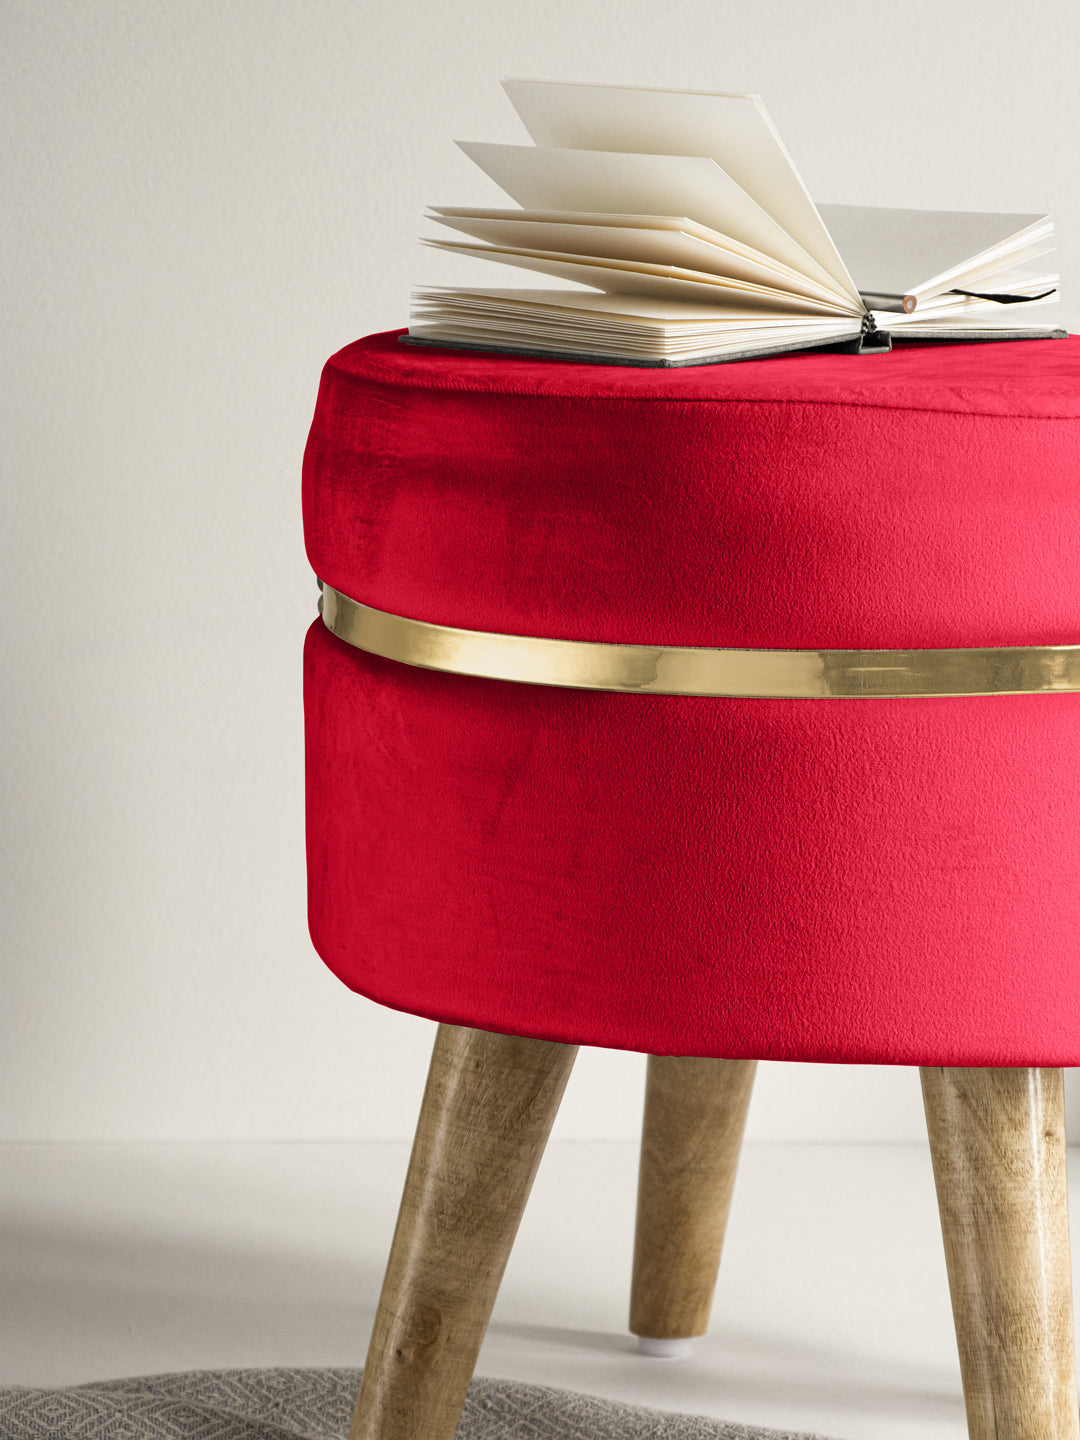 Suede Crismon Red Stool With Golden Ring & Wood Legs